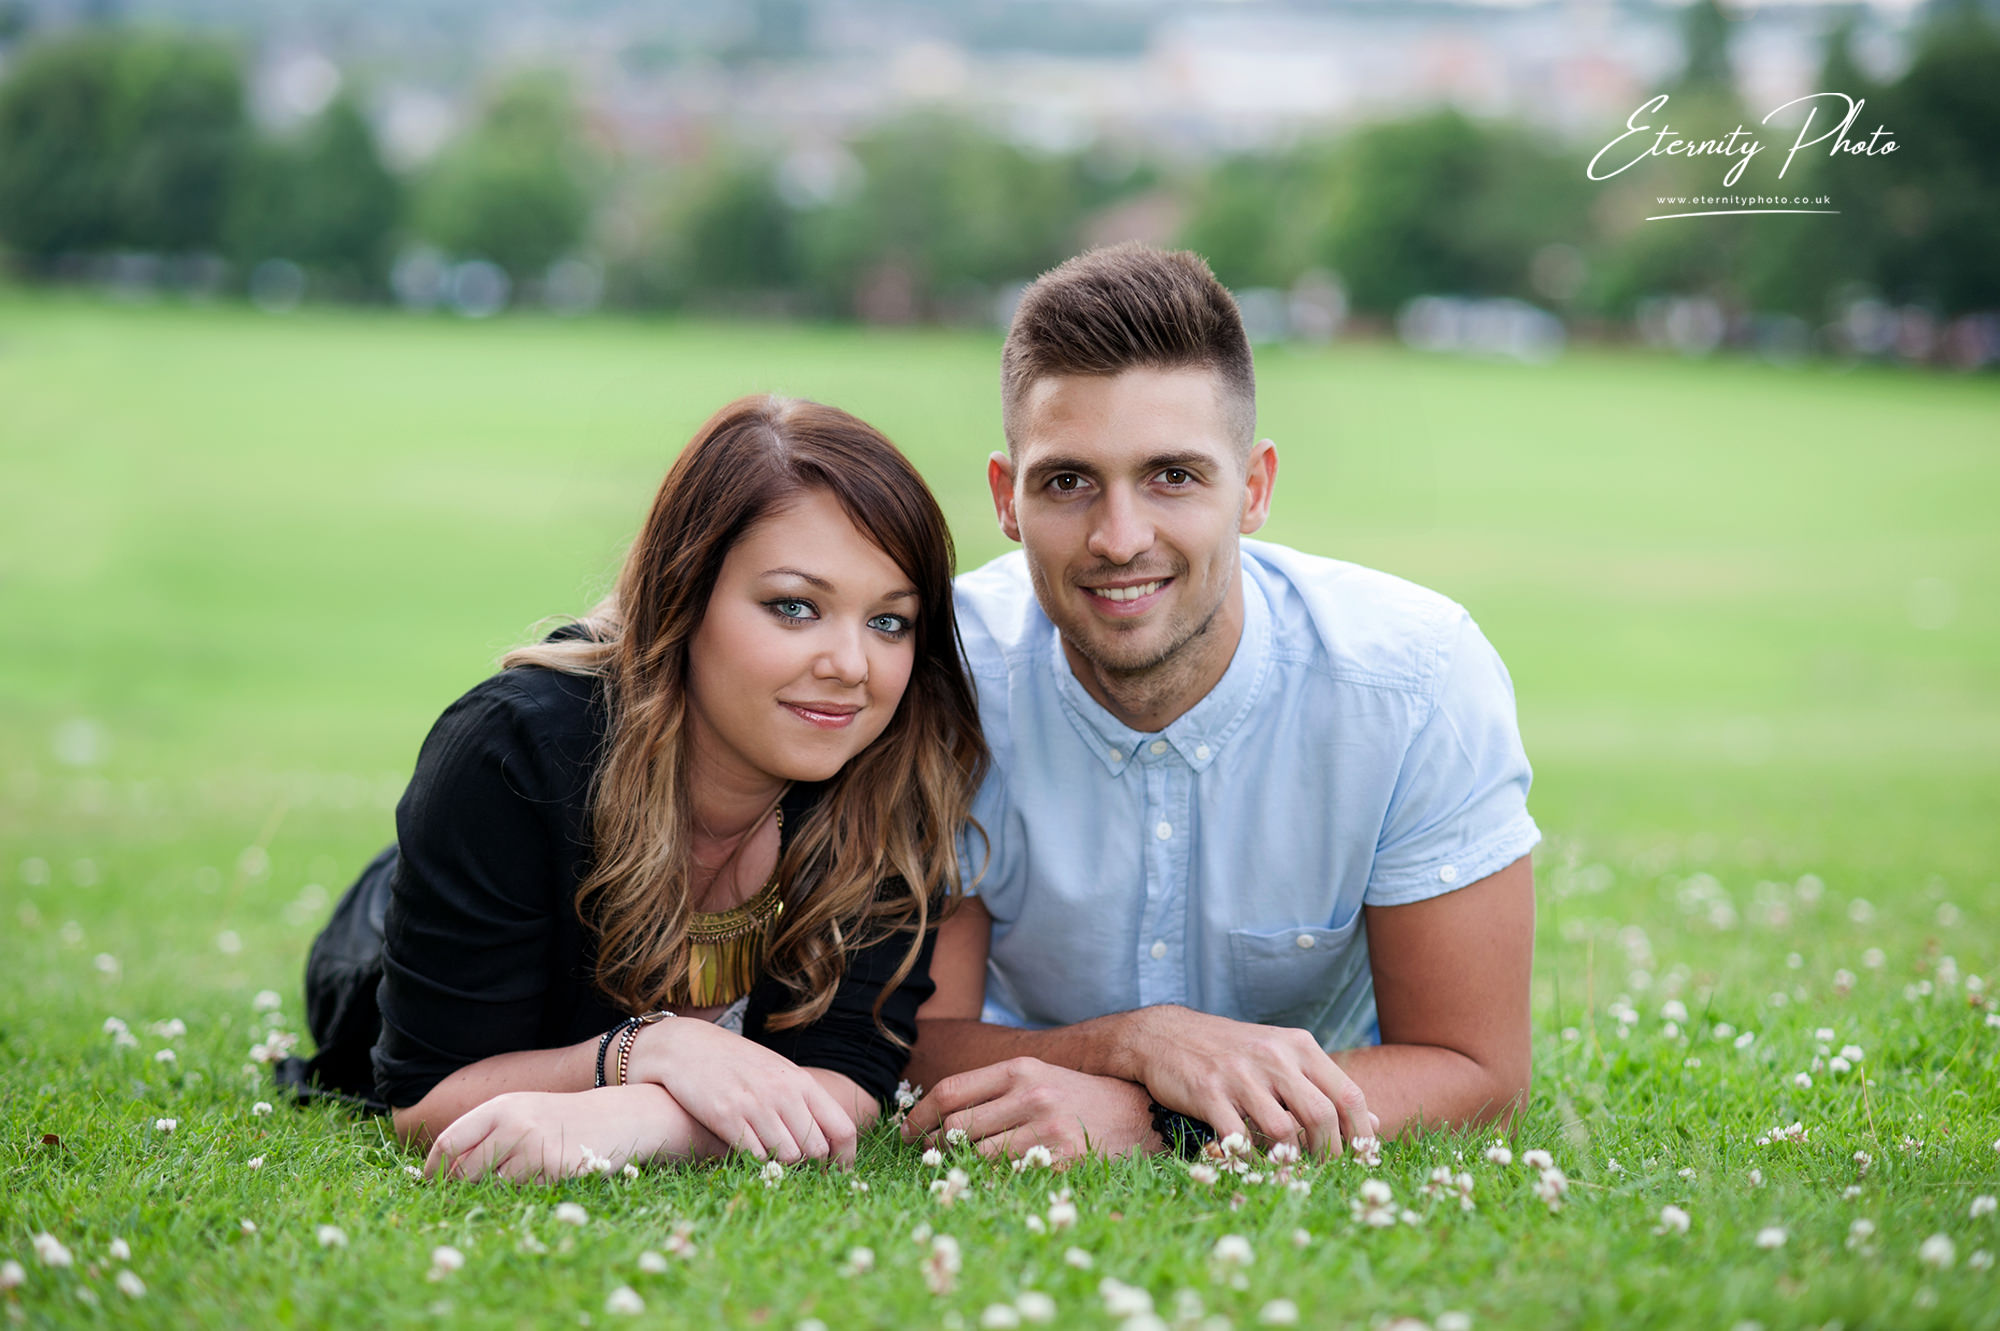 Couple lying on grass in a park.